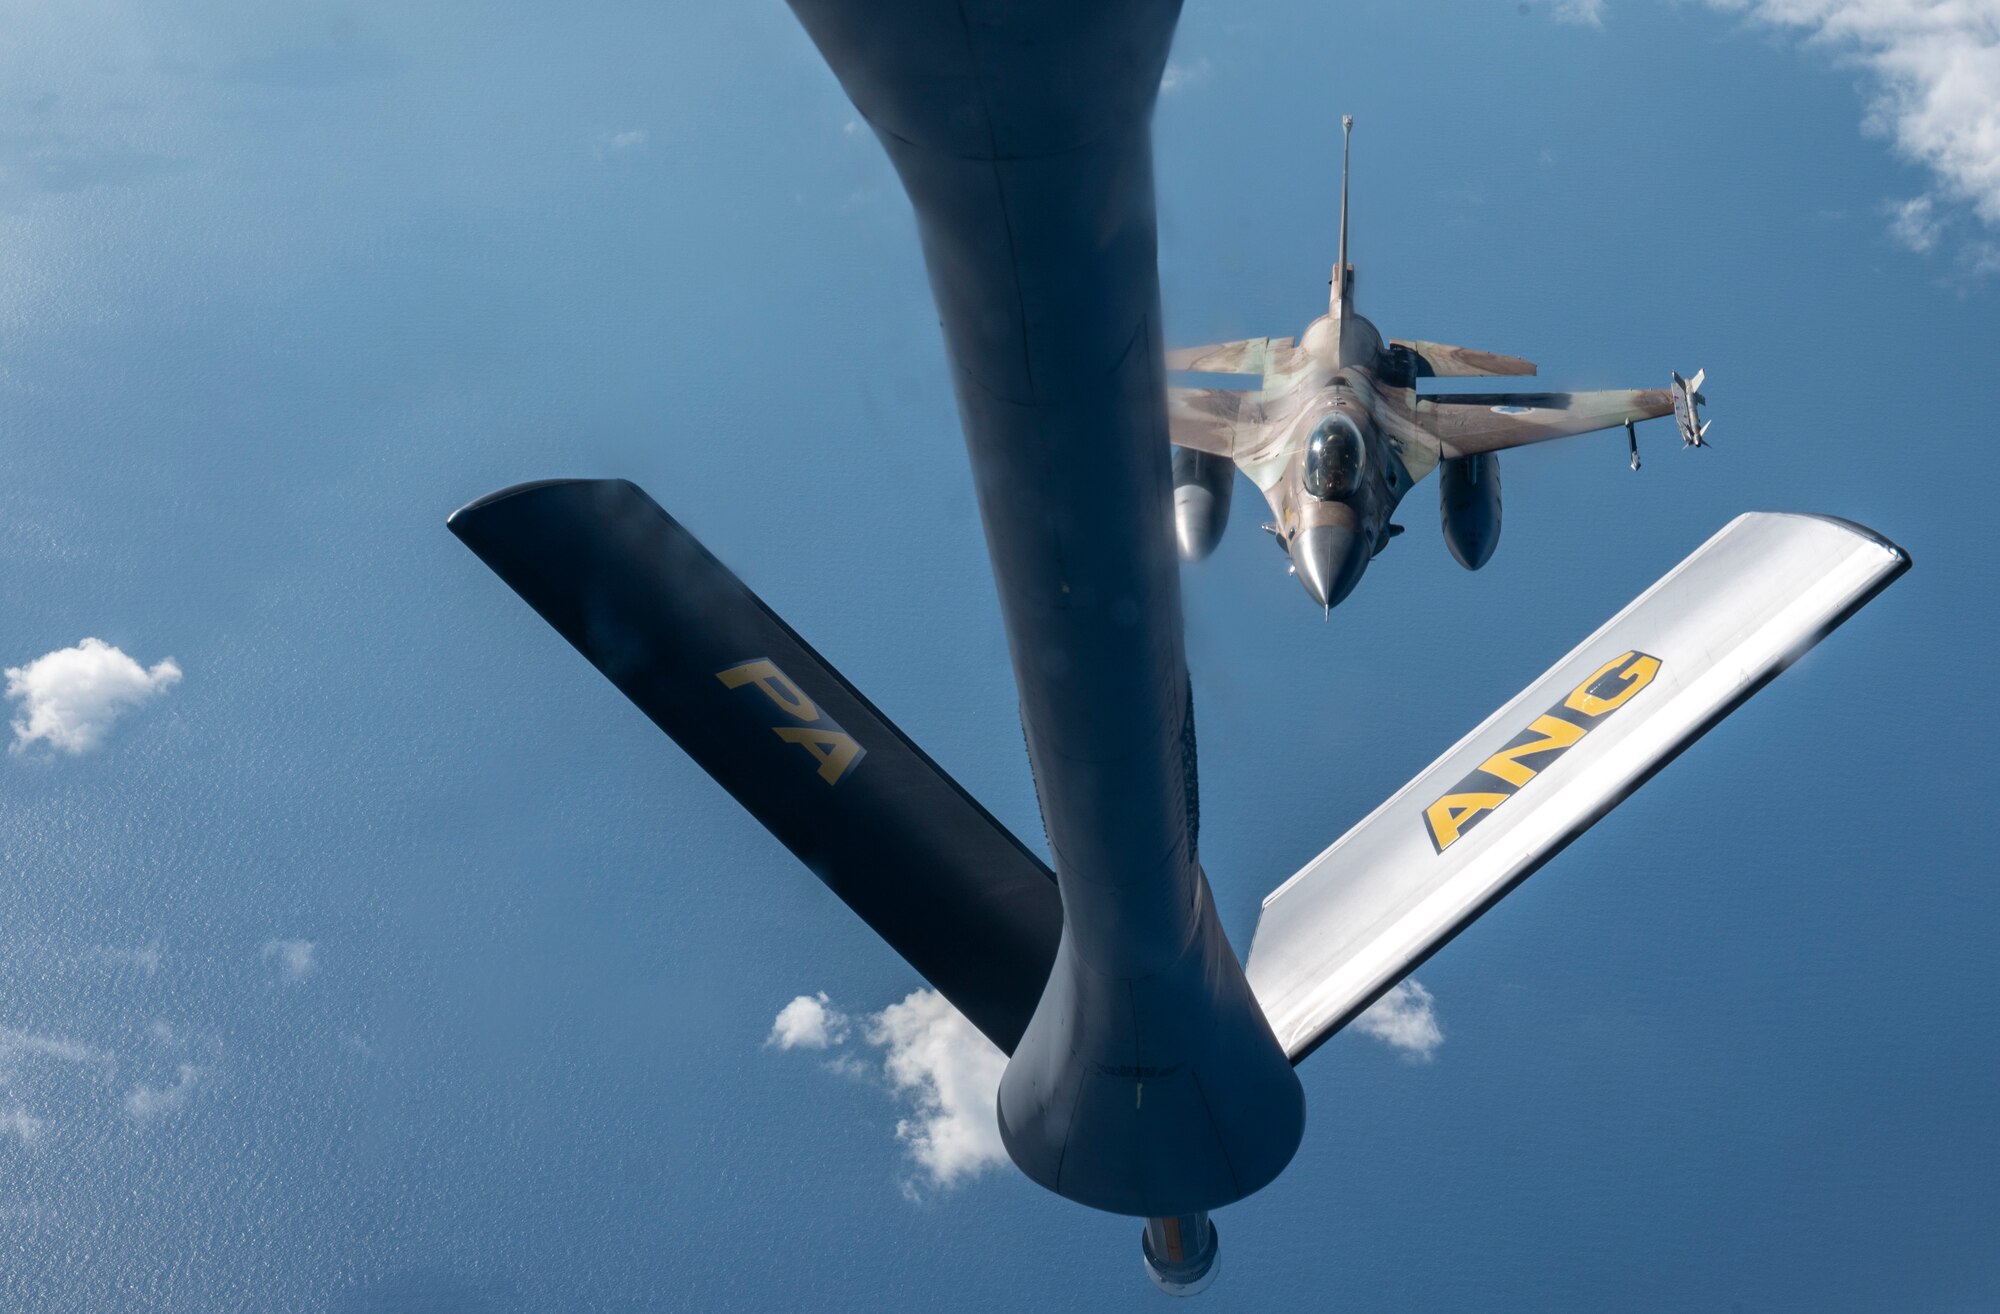 An Israeli Air Force F-16 Fighting Falcon prepares to receive refuel from a U.S. Air Force KC-135 Stratotanker assigned to the 340th Expeditionary Air Refueling Squadron, as part of a bilateral exercise in the U.S. Central Command area of responsibility, Nov. 30, 2022. The exercise demonstrated fighter aircraft integration and escort as well as refueling operations as part of the first of several exercises to maintain the ironclad commitment and bilateral aerial capability between the U.S. and Israeli Air Forces. (U.S. Air Force photo by Staff Sgt. Kirby Turbak)